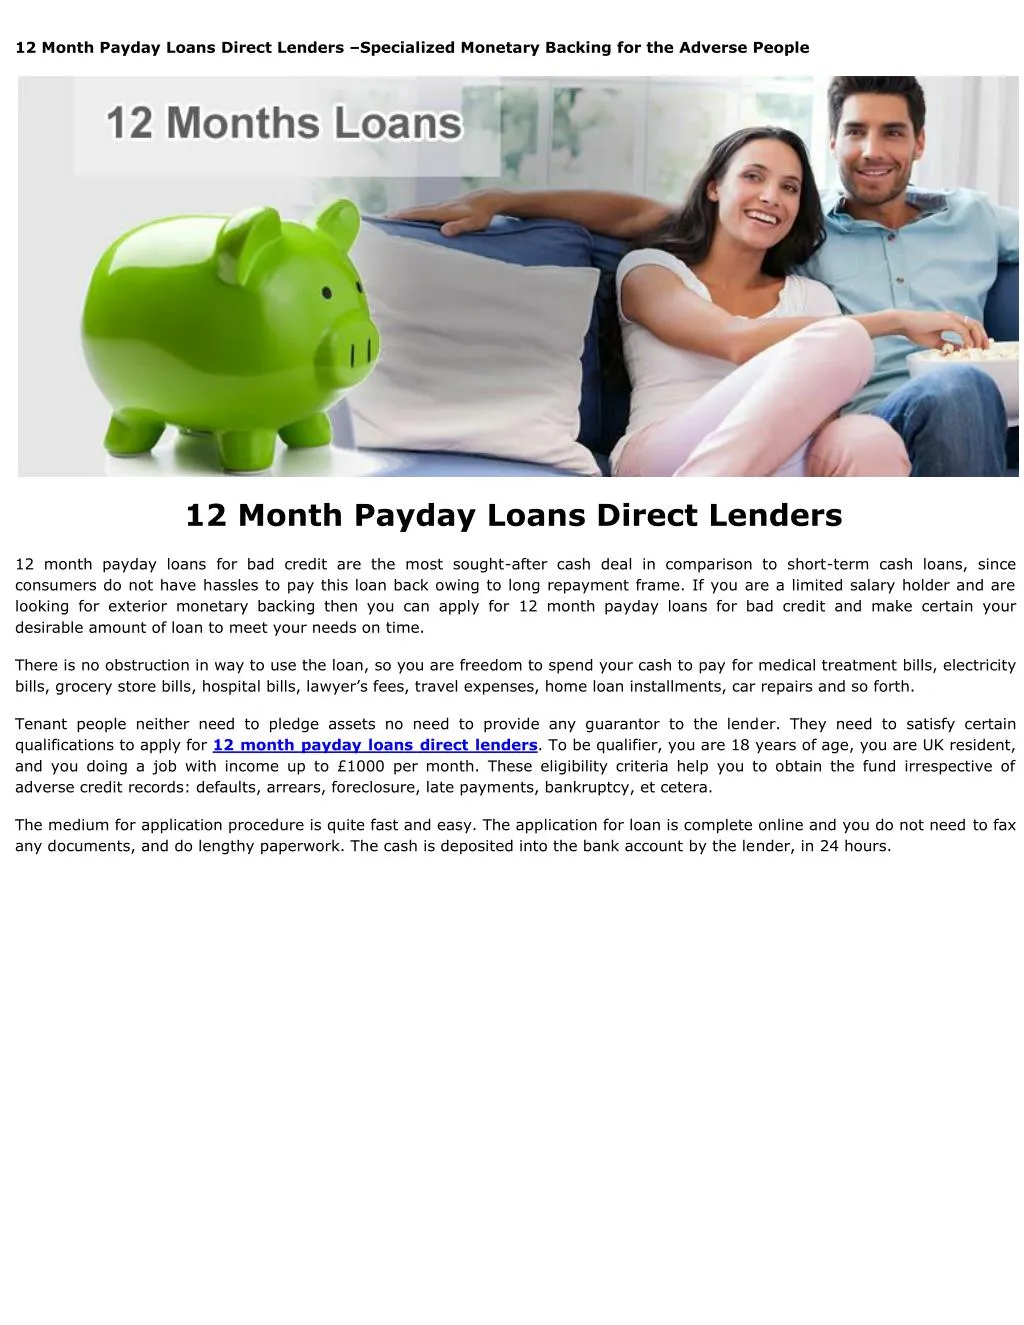 12 month payday loans direct lenders specialized